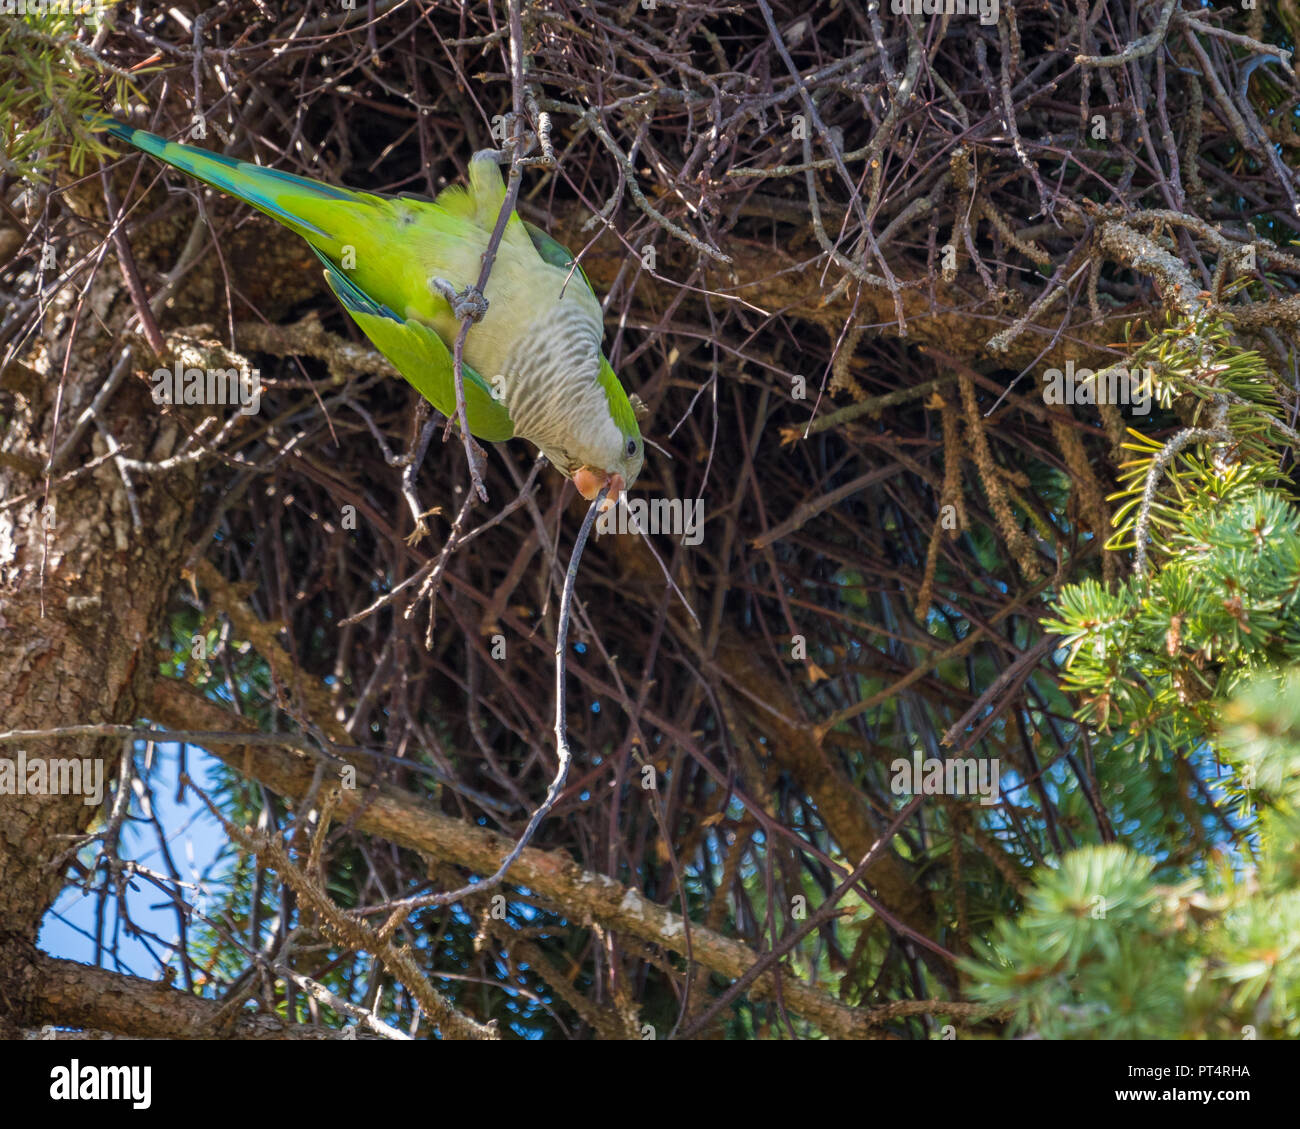 Green parrot building a nest in a pine tree with a stick in its beak, in Connecticut USA Stock Photo